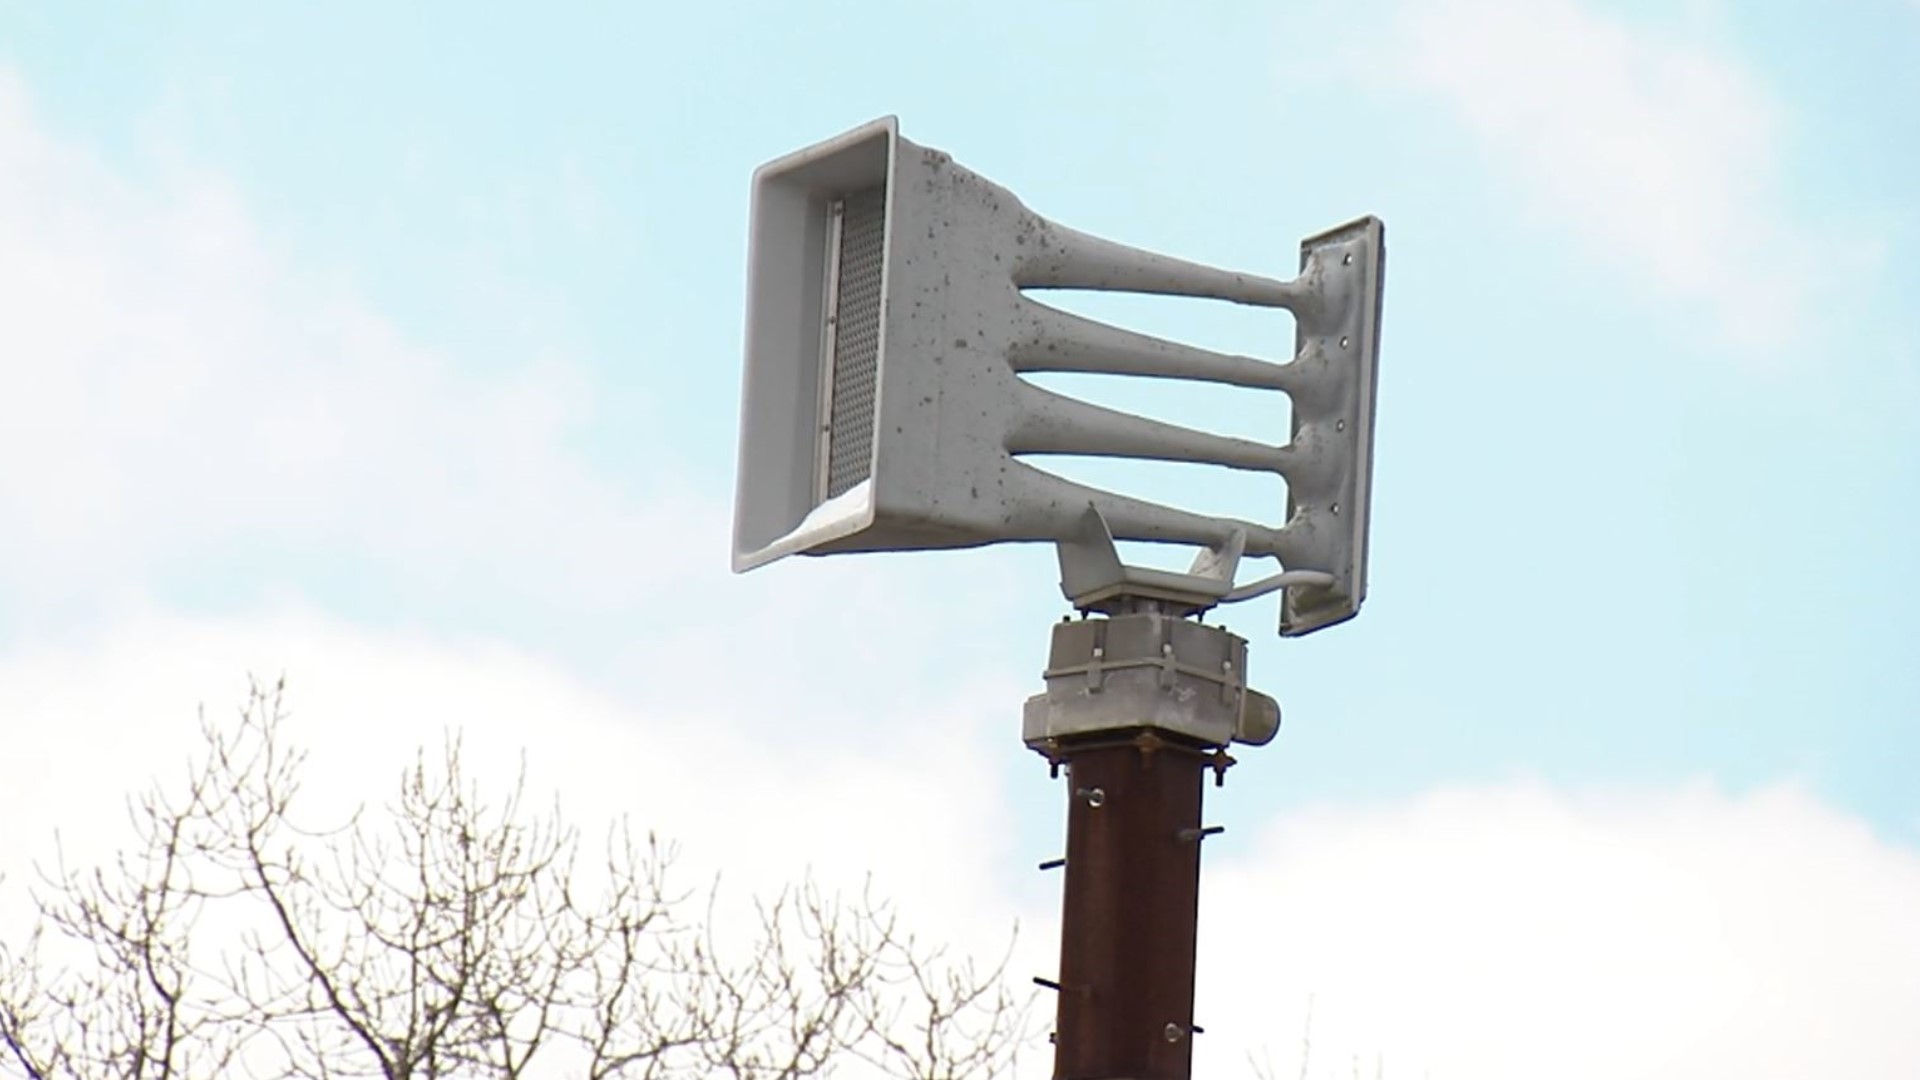 Tornado sirens will sound for 3 minutes Wednesday as part of statewide